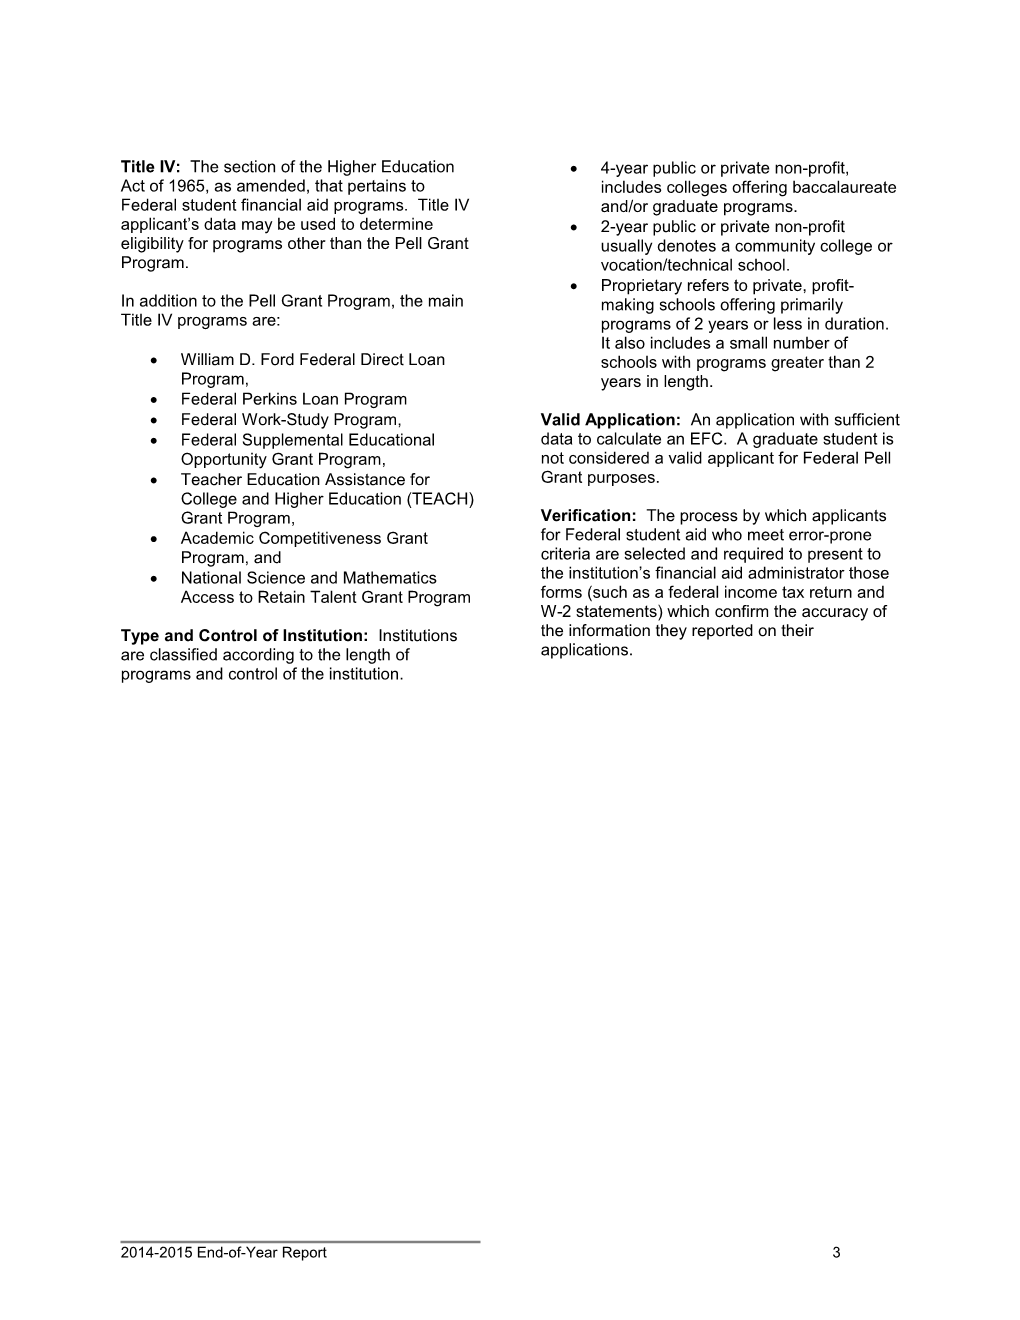 Federal Pell Grant Program End-Of-Year Report for 2014-2015: Glossary (MS Word)